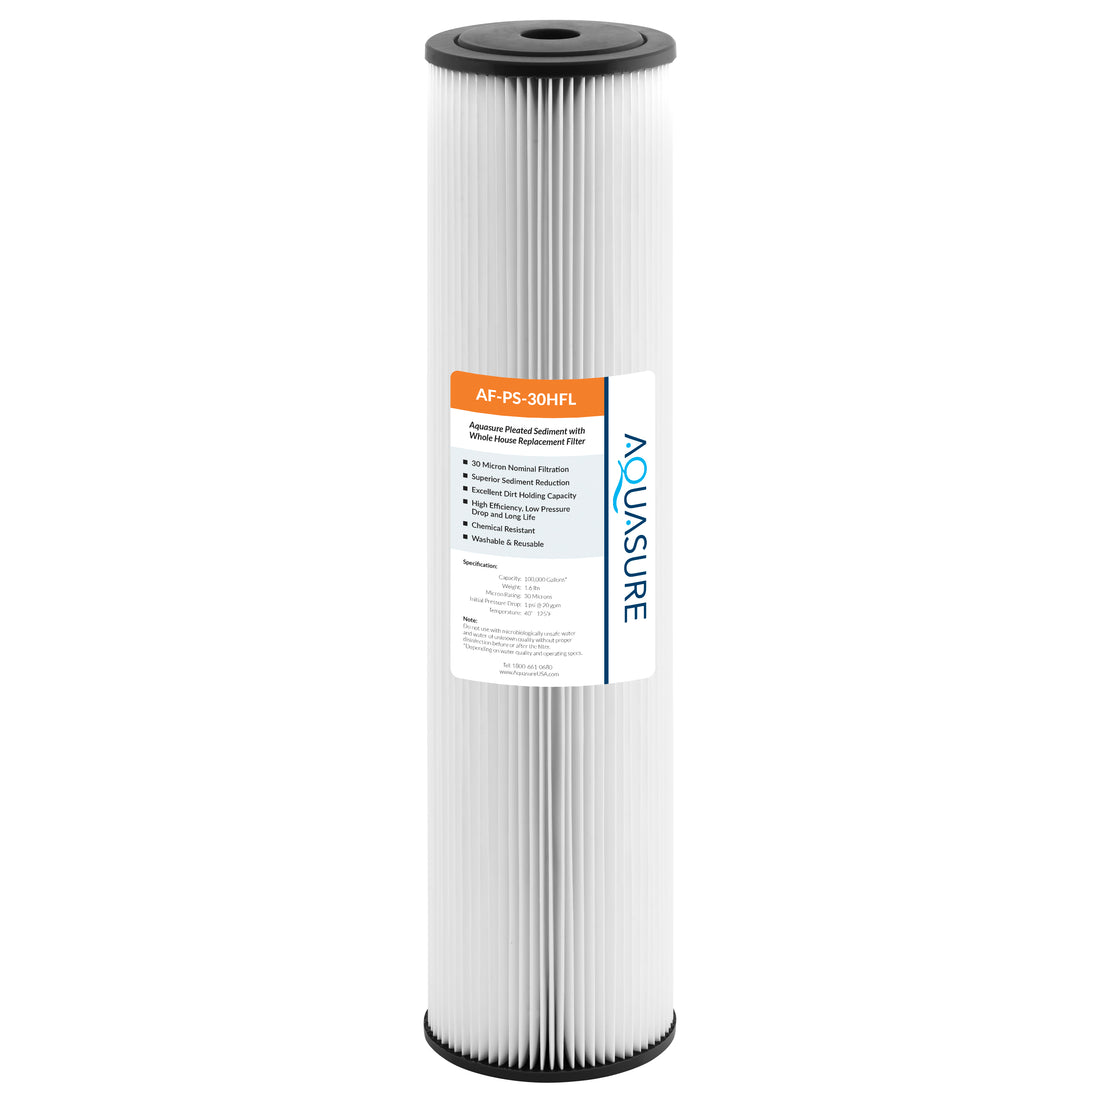 Fortitude V2 Series | High Flow 30 Micron Pleated Sediment Filter - Large Size